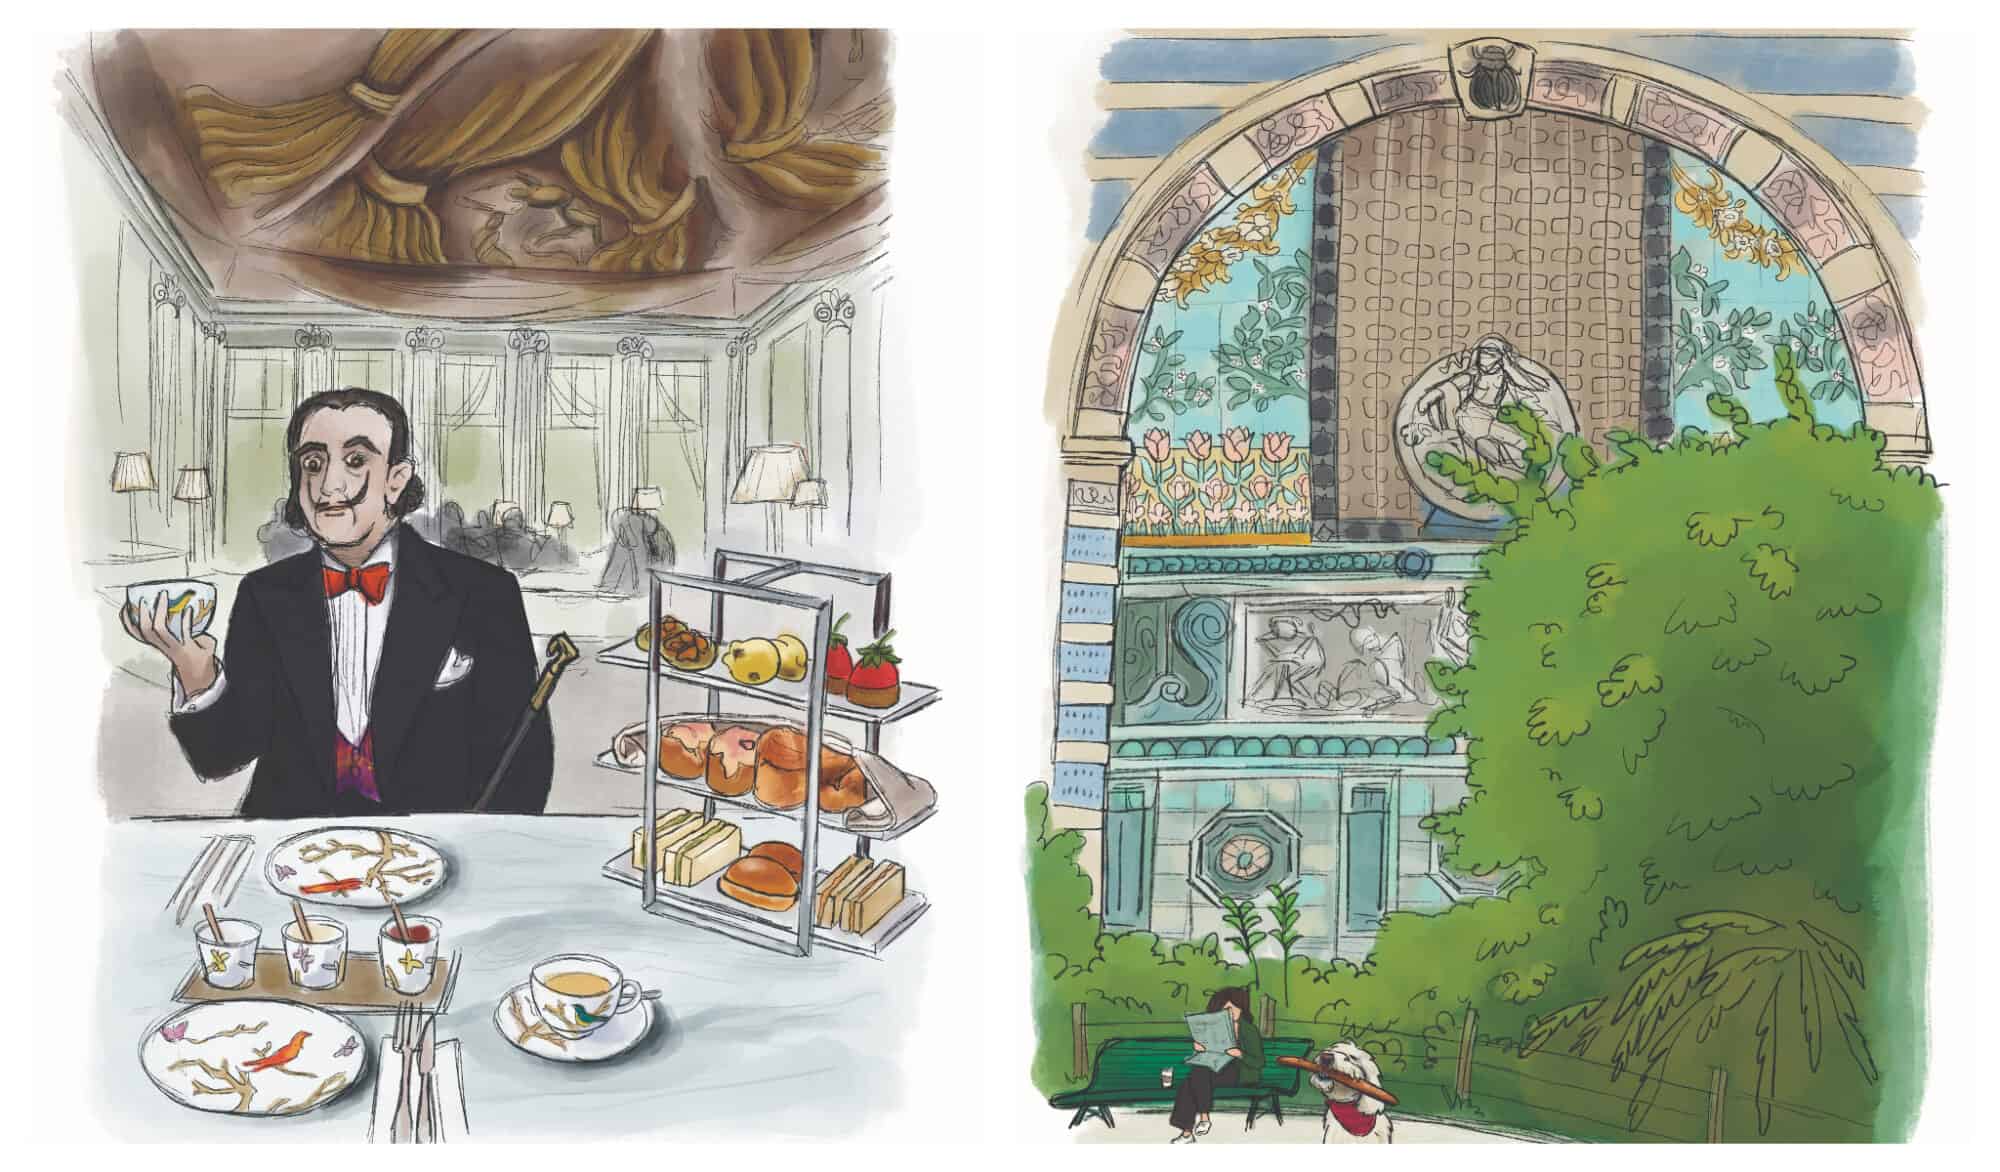 Lef: an illustration of the artist Salvadore Dali eating in a restaurant. Right: An illustration of a square in Paris full of greeneries and an art nouveau building